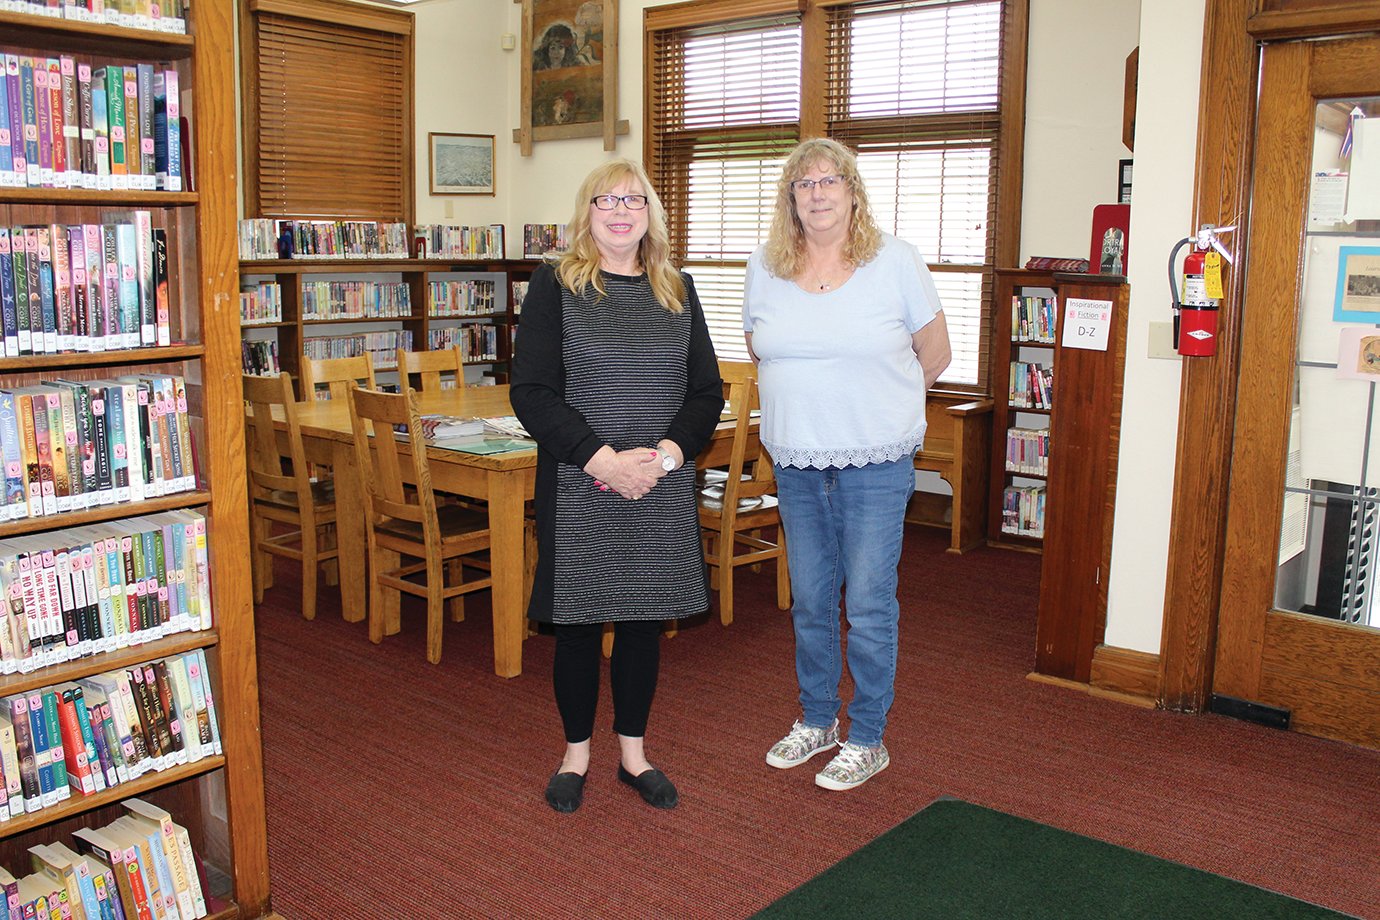 Linden Library Director Kathie Watkins, left, and Circulation Manager Alice McCloud invite the public to an open house Tuesday to celebrate the library.